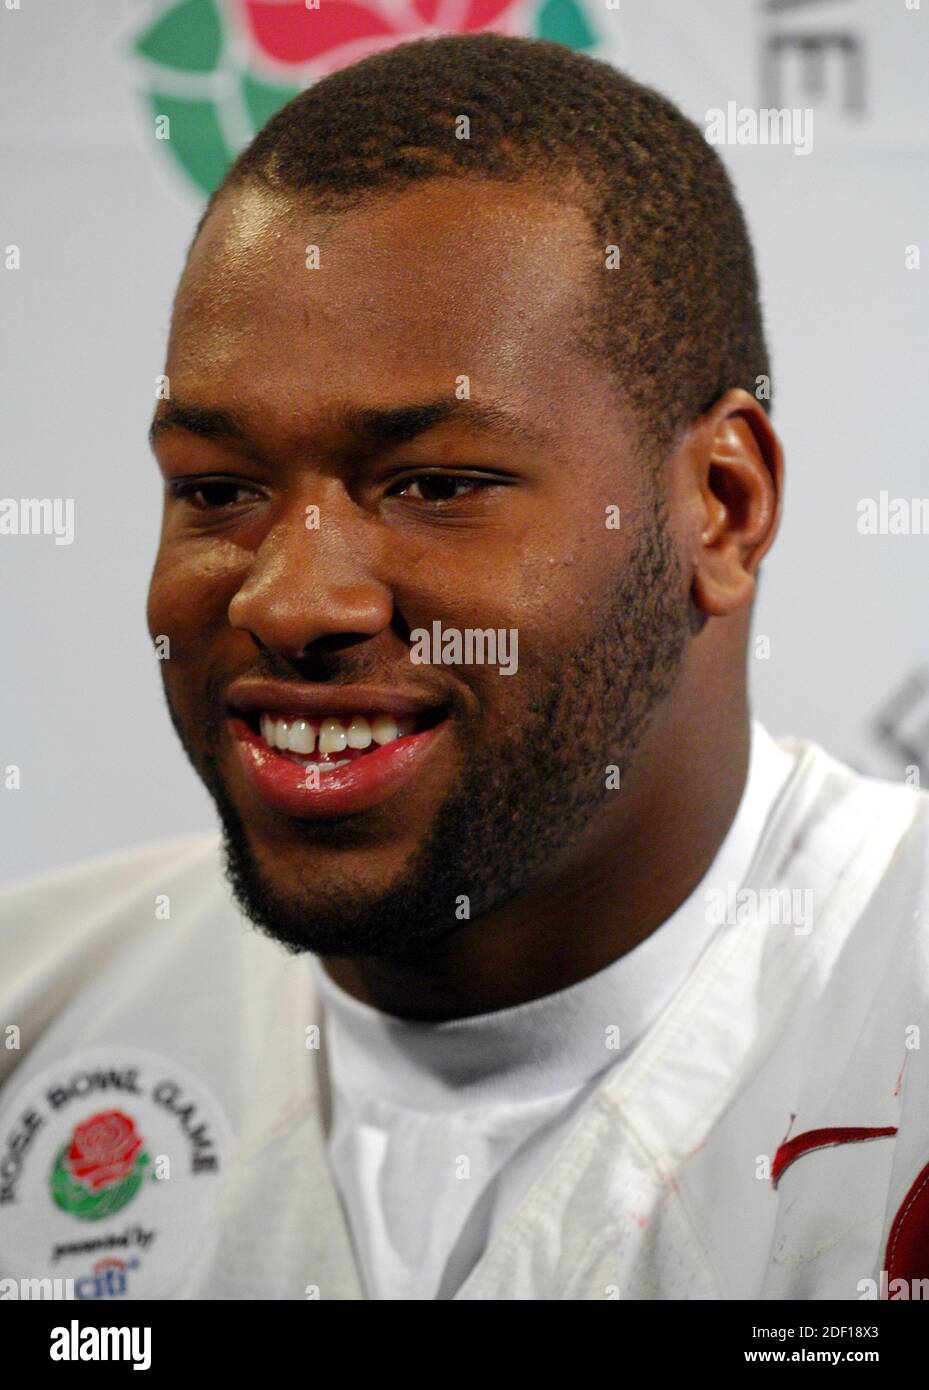 Carson United States 30th Dec 06 Usc Defensive End Lawrence Jackson At Rose Bowl Media Day At The Home Depot Center In Carson Calif On Saturday December 30 06 Photo Via Credit